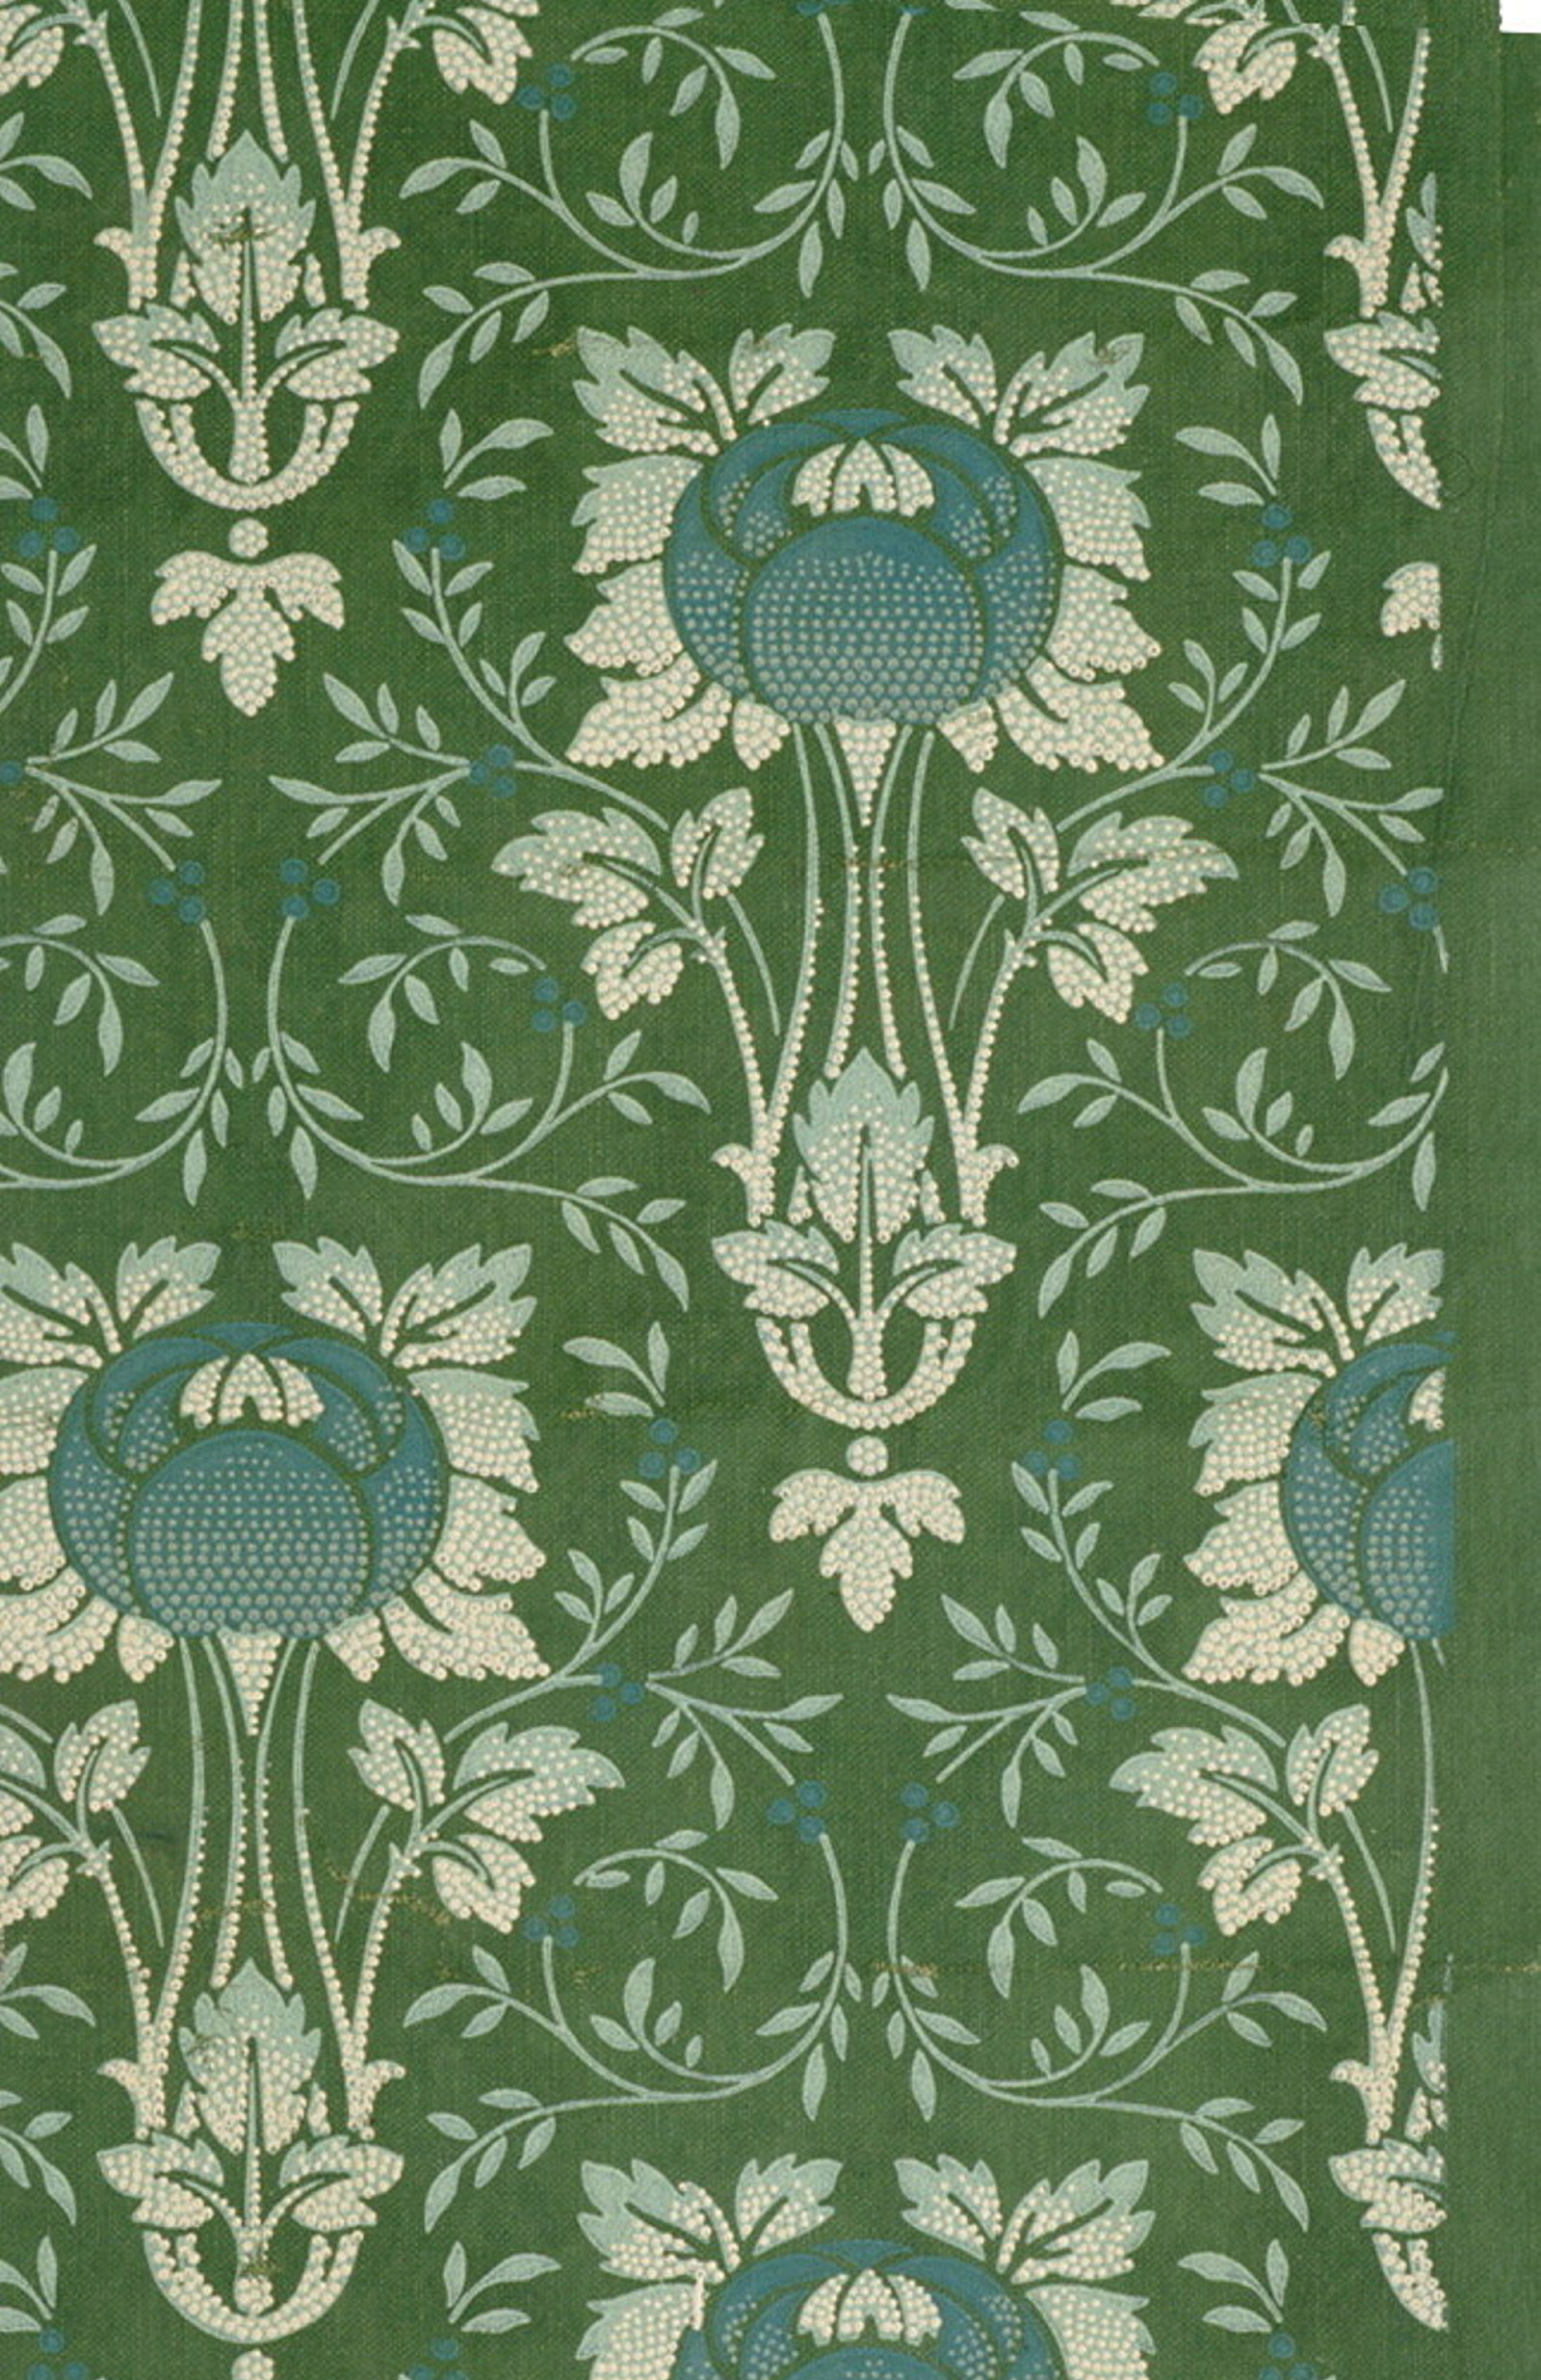 Holland blind remnant printed late 19th century